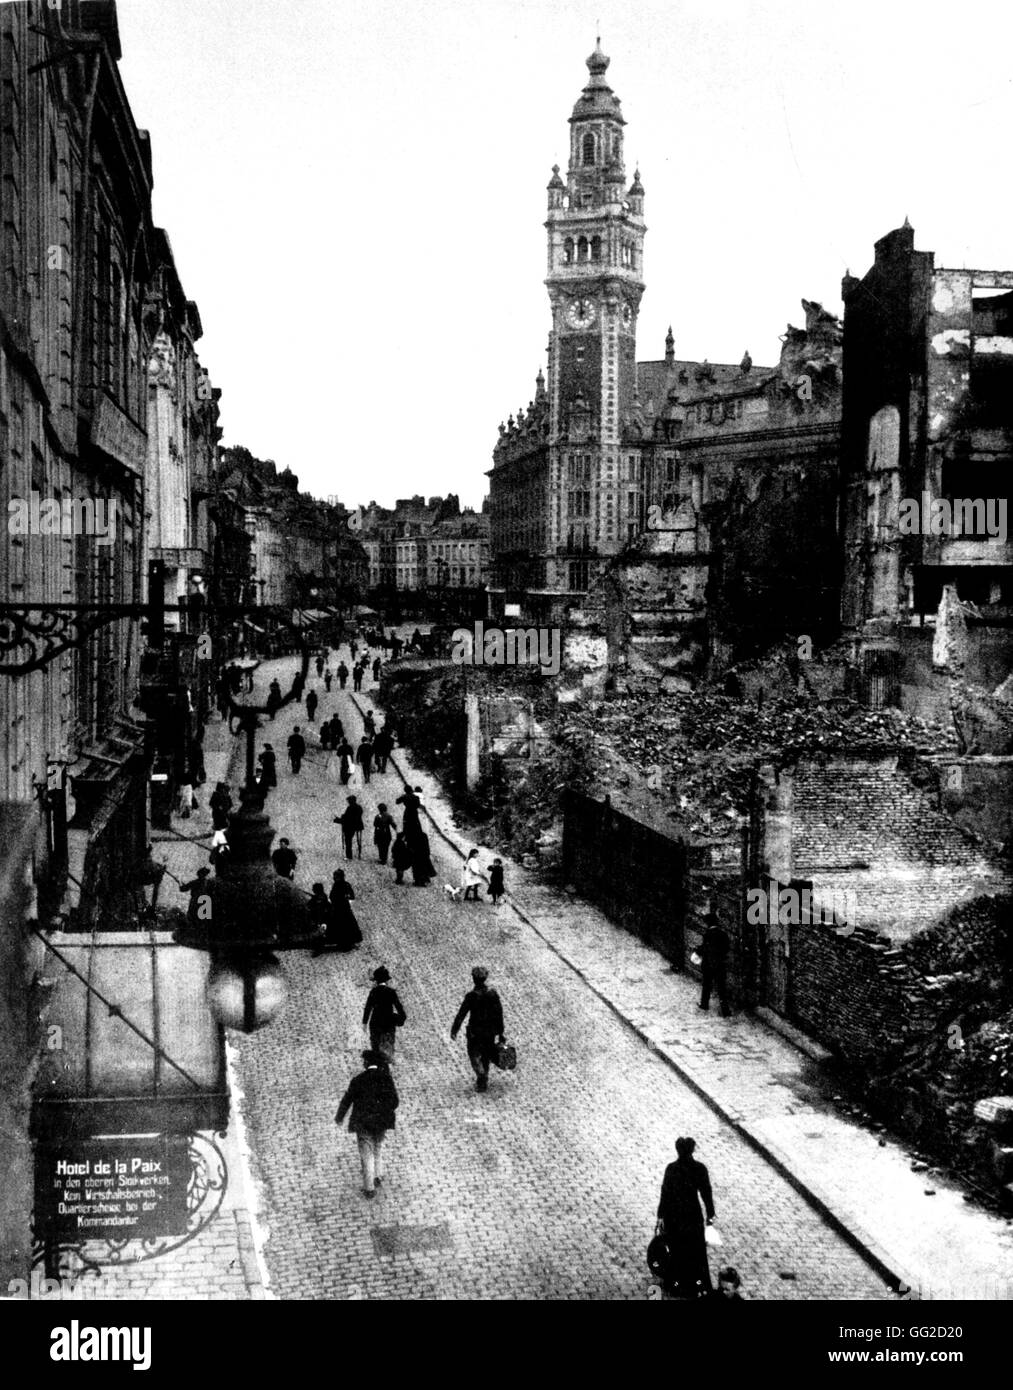 Under the German occupation in France: the destroyed city of Lille. On the left corner, poster in front of the hotel de la Paix transformed into the Kommandantur headquarters France - World War I B.D.I.C. Stock Photo